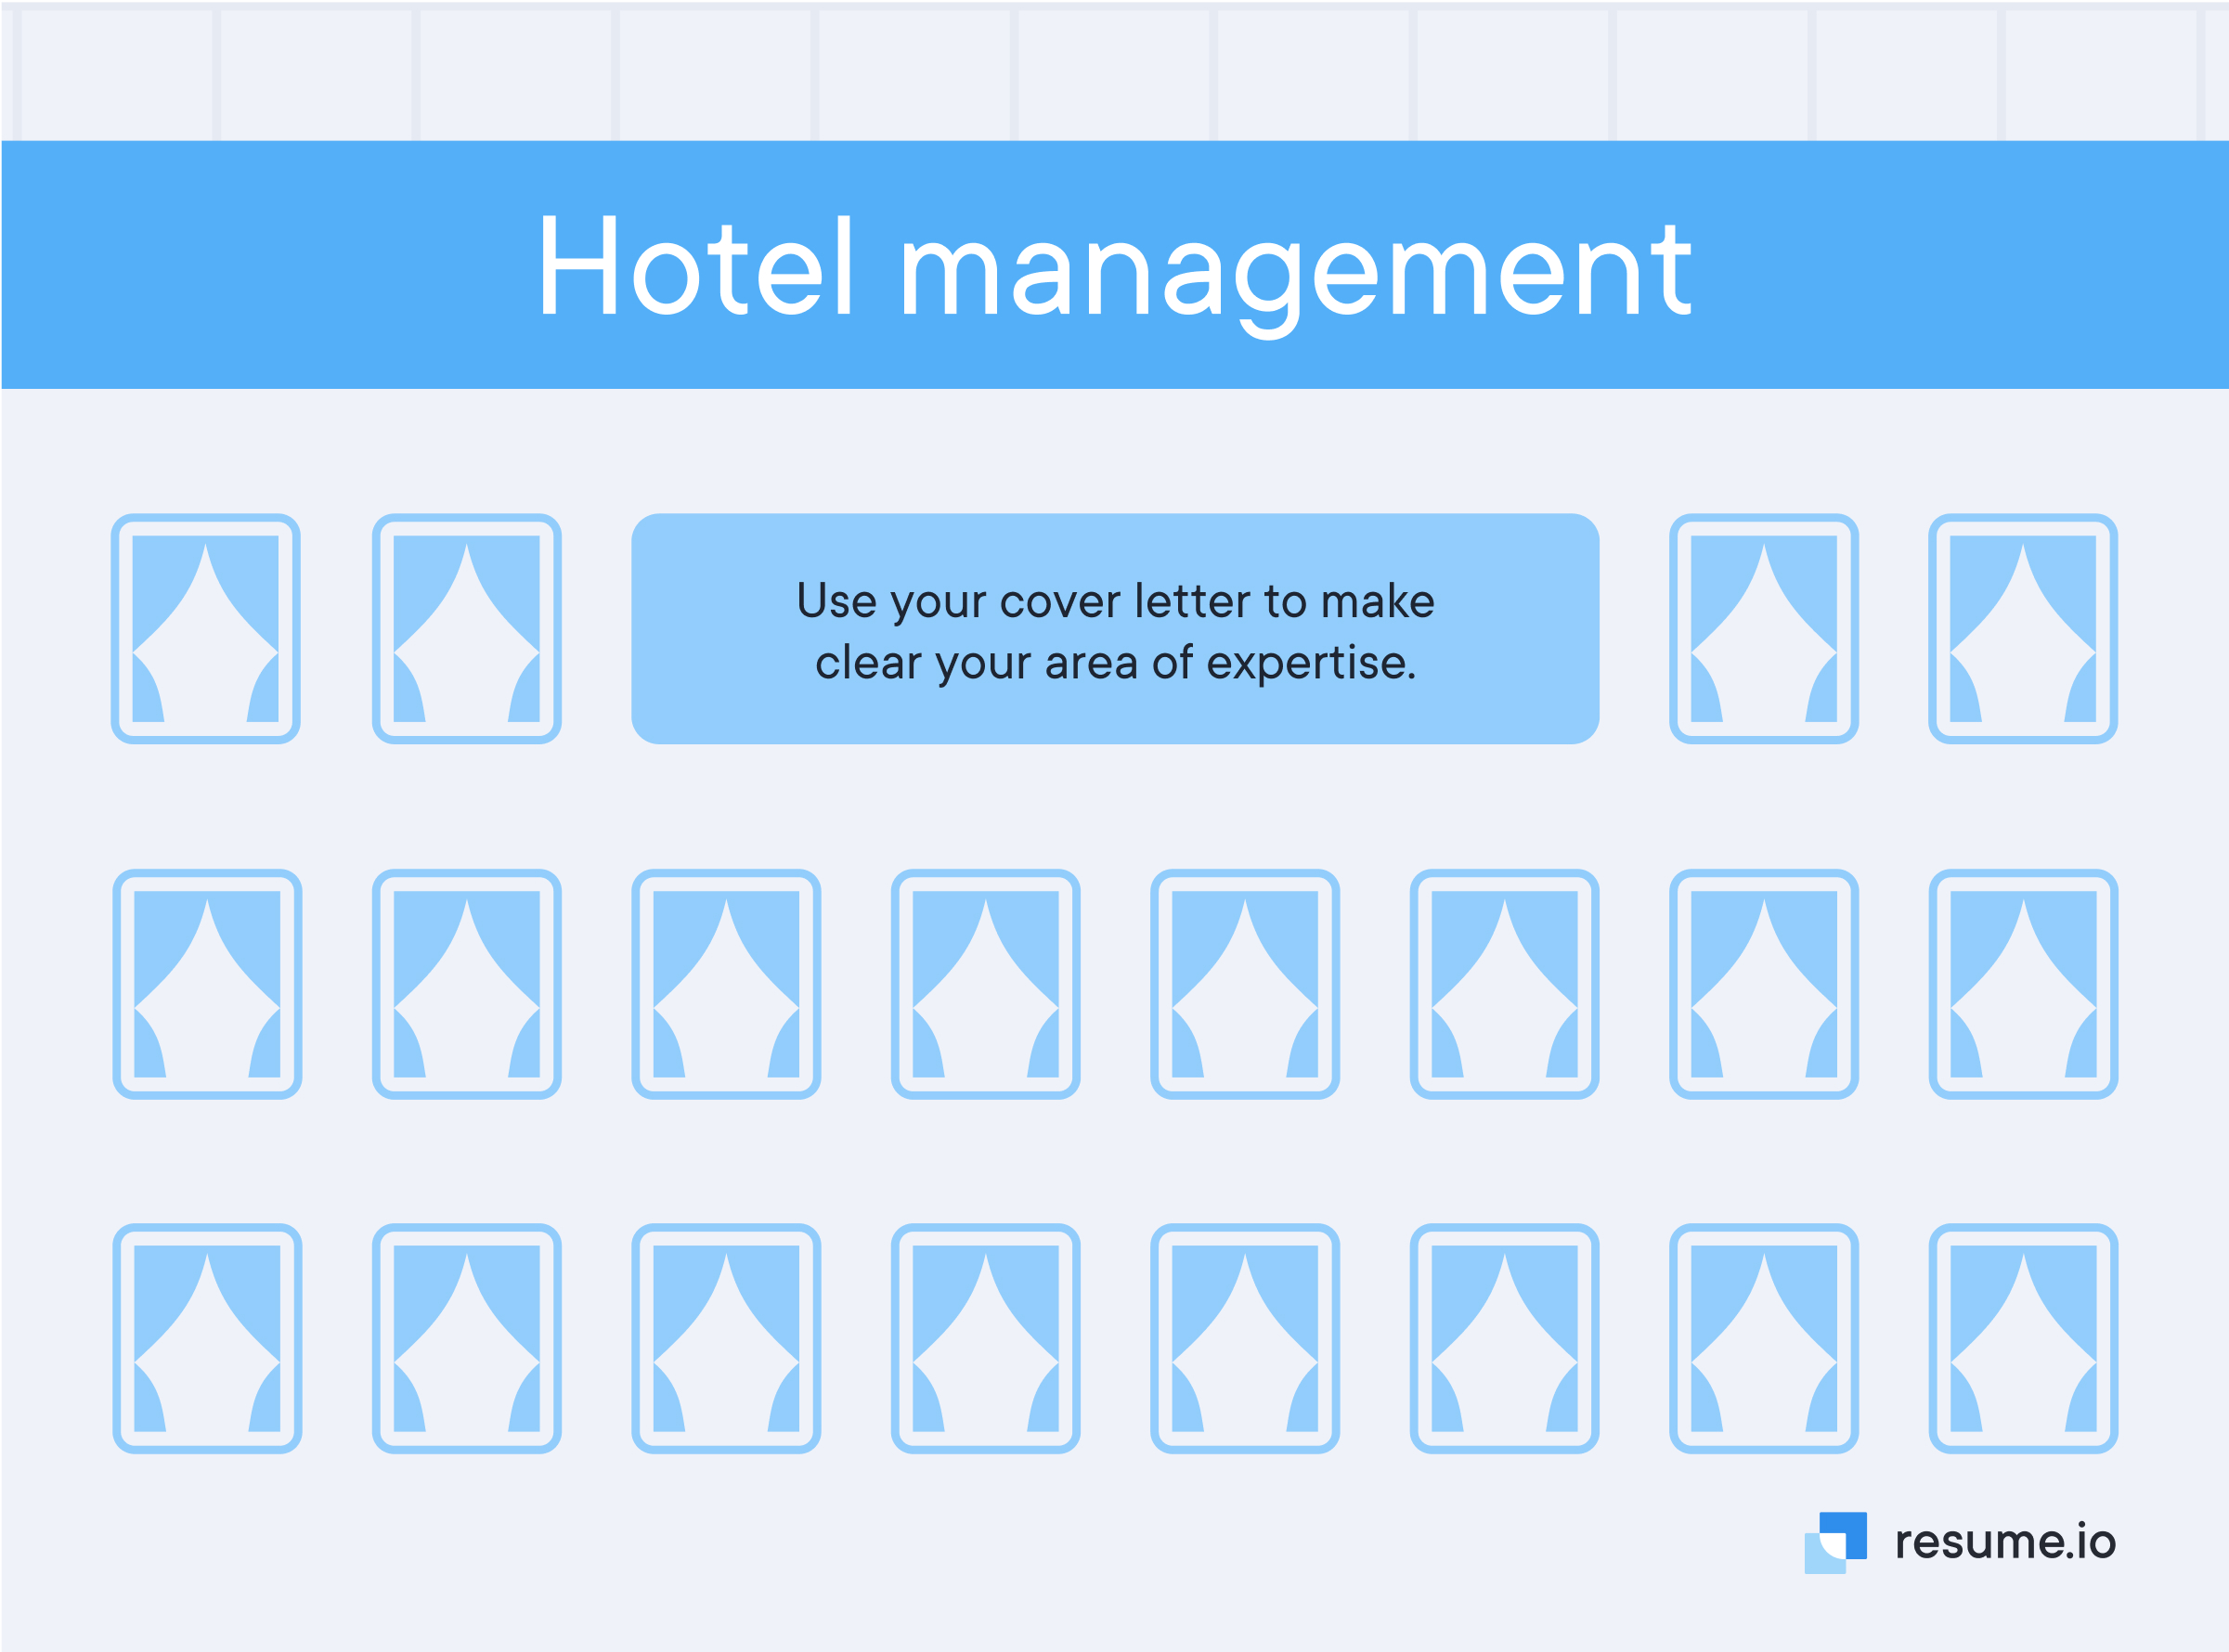 Hotel management: Use your cover letter to make clear your area of expertise. 